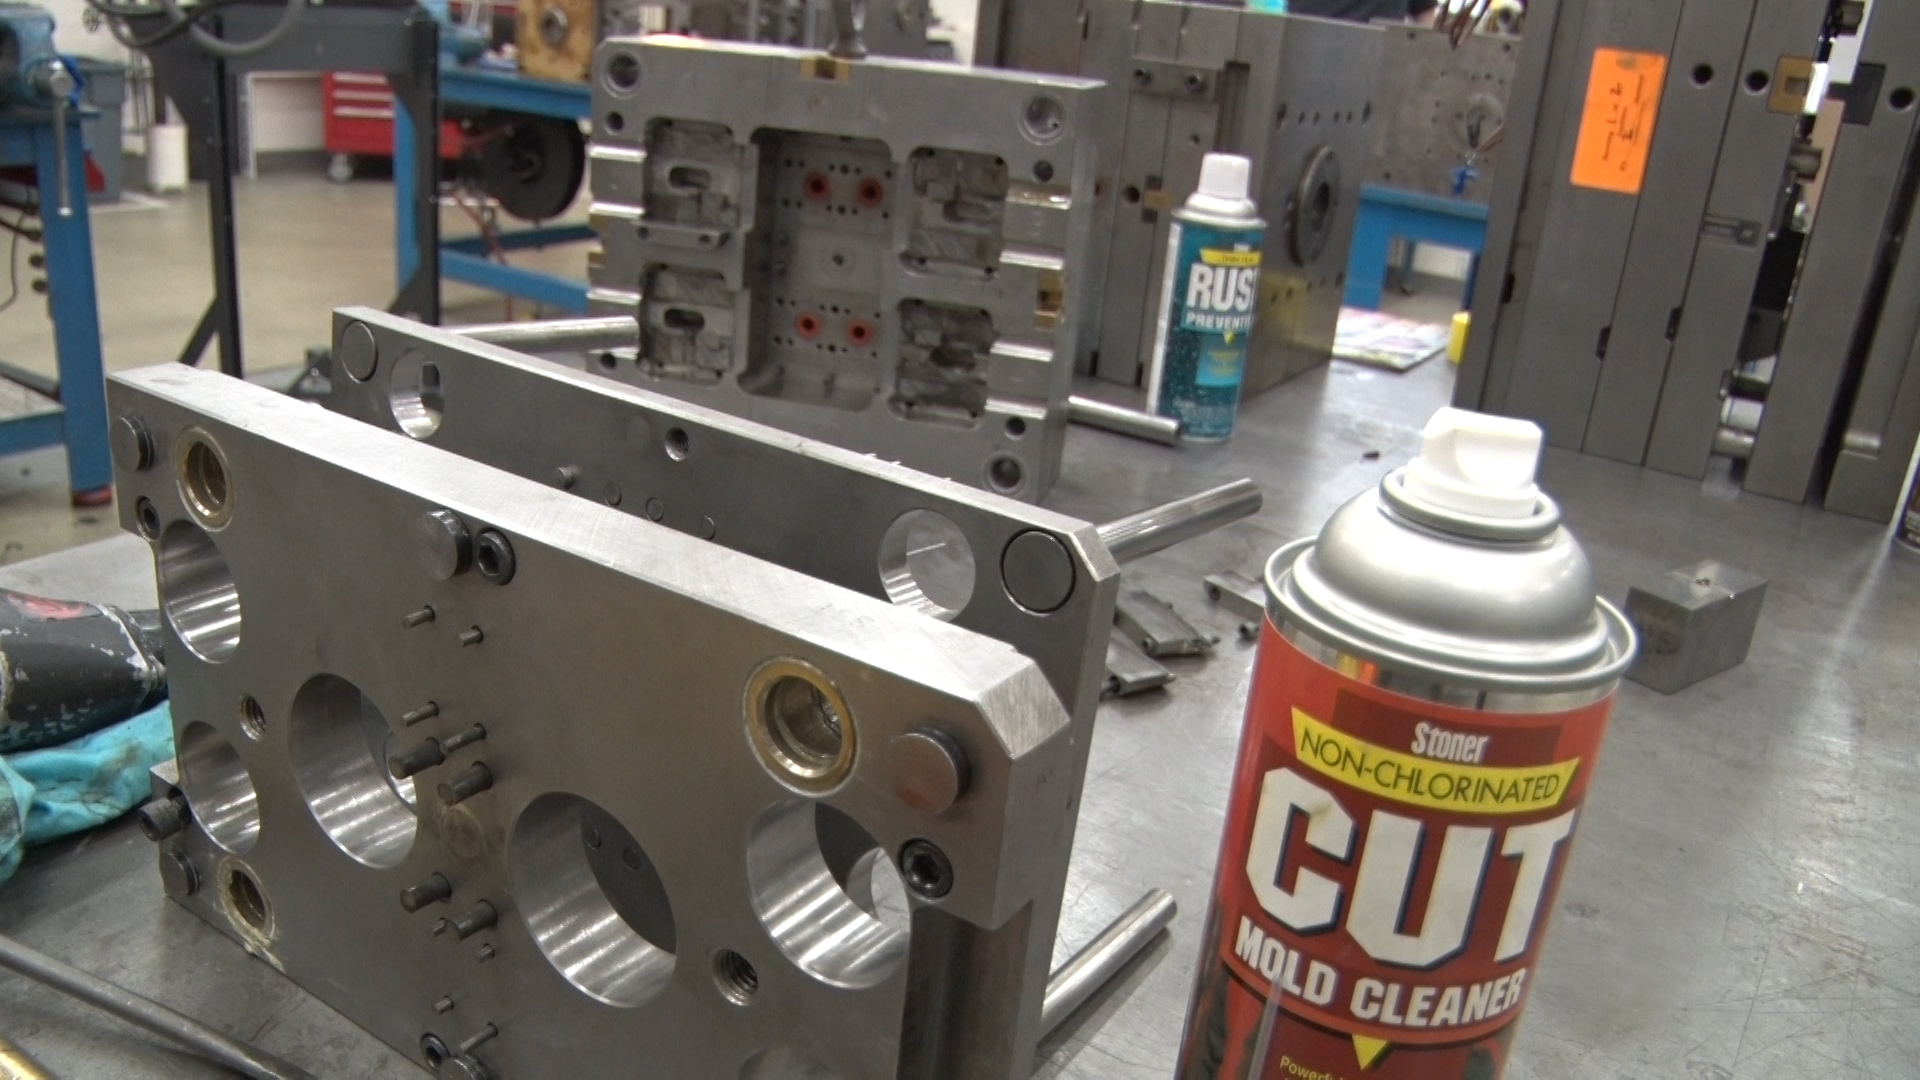 CUT mold cleaner from Stoner Molding sits in front of a clean injection mold.